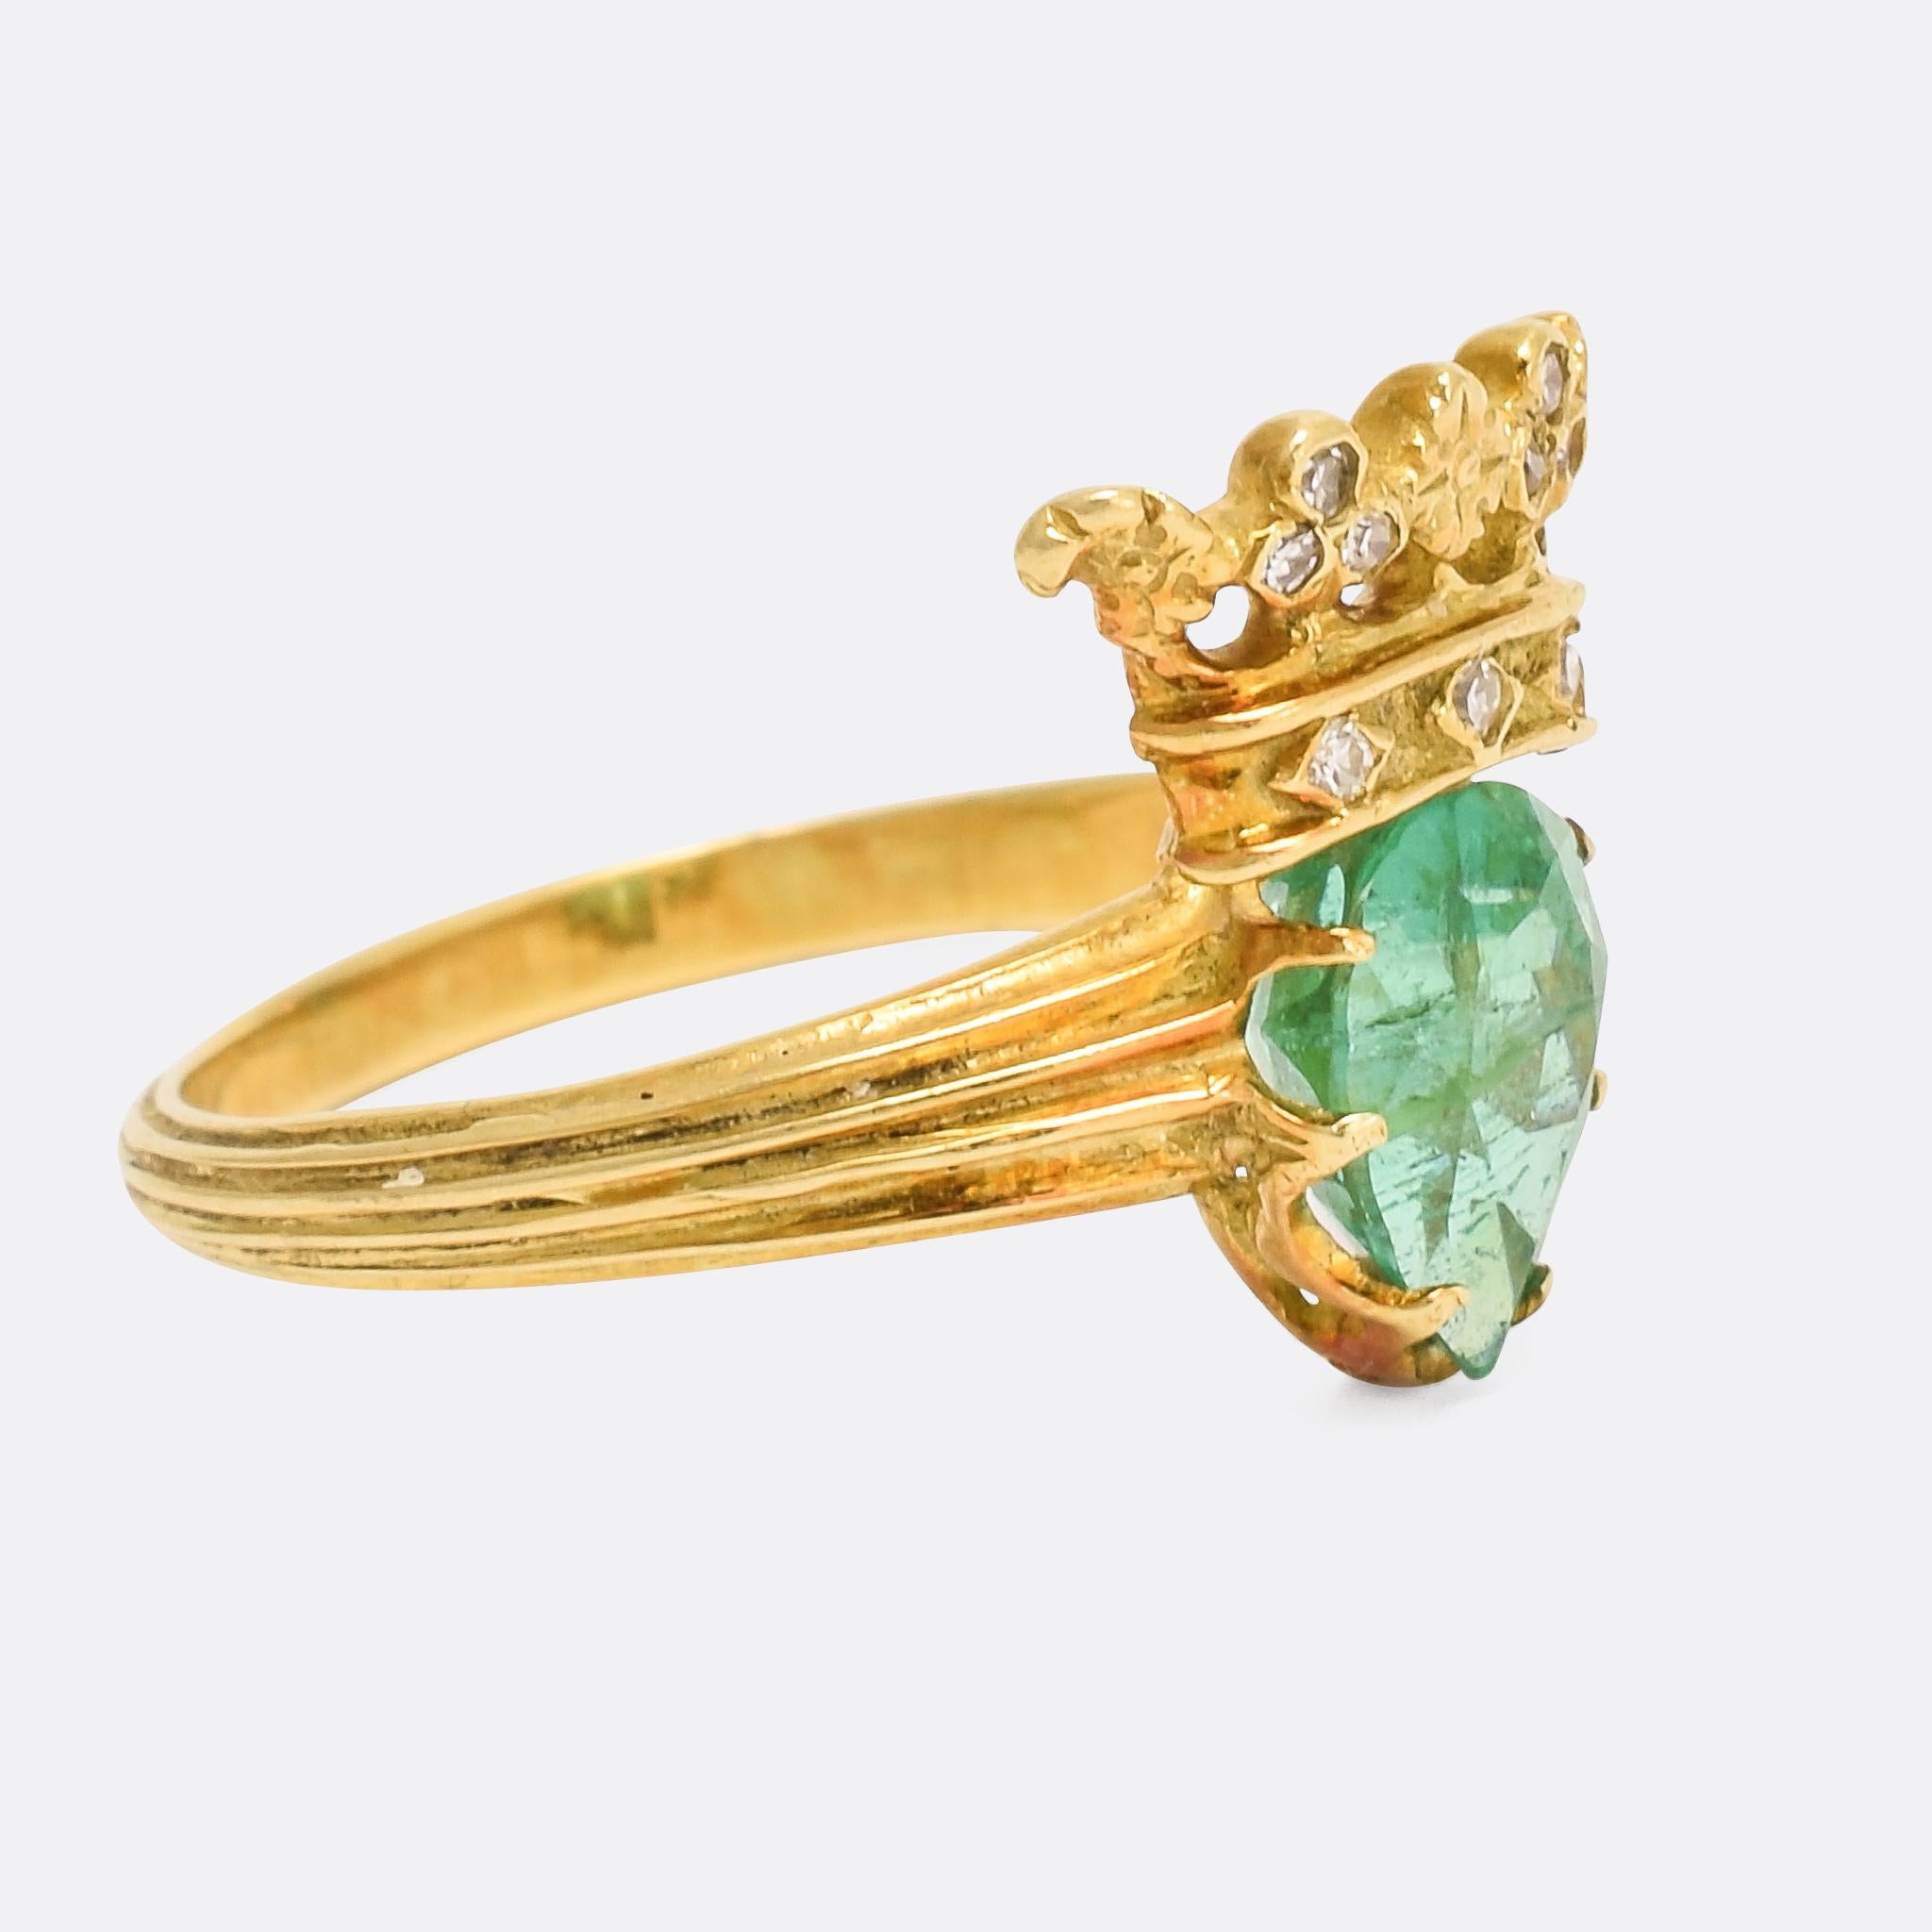 A superb antique crowned heart ring dating from the late Victorian era. The heart-shaped emerald rest beneath a gleaming diamond-set crown - all intricately worked with a great level of detail. Modelled in 18 karat gold with am interesting grooved